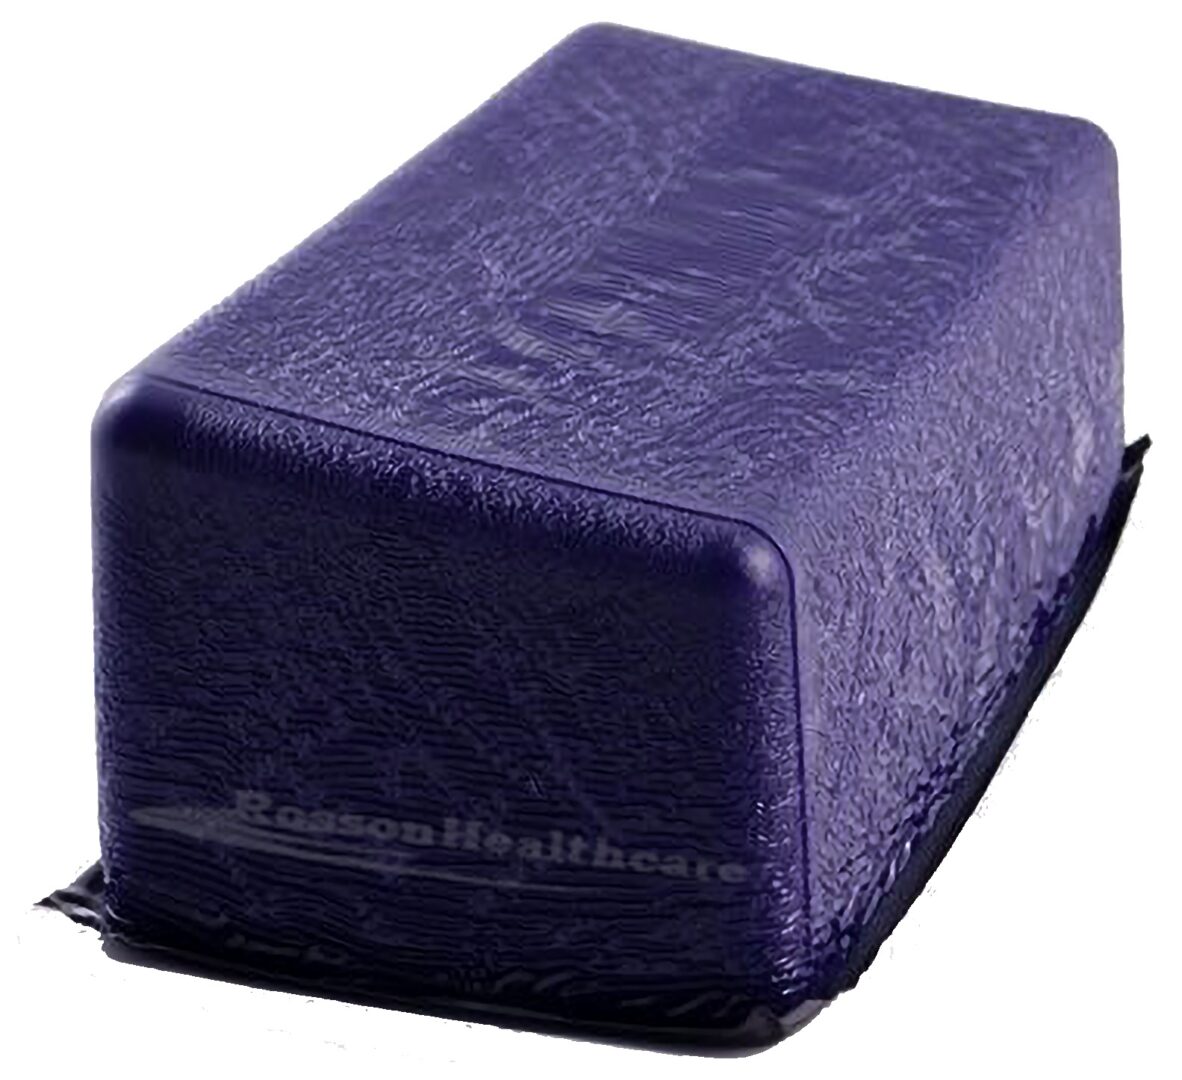 A purple box sitting on top of a white table.